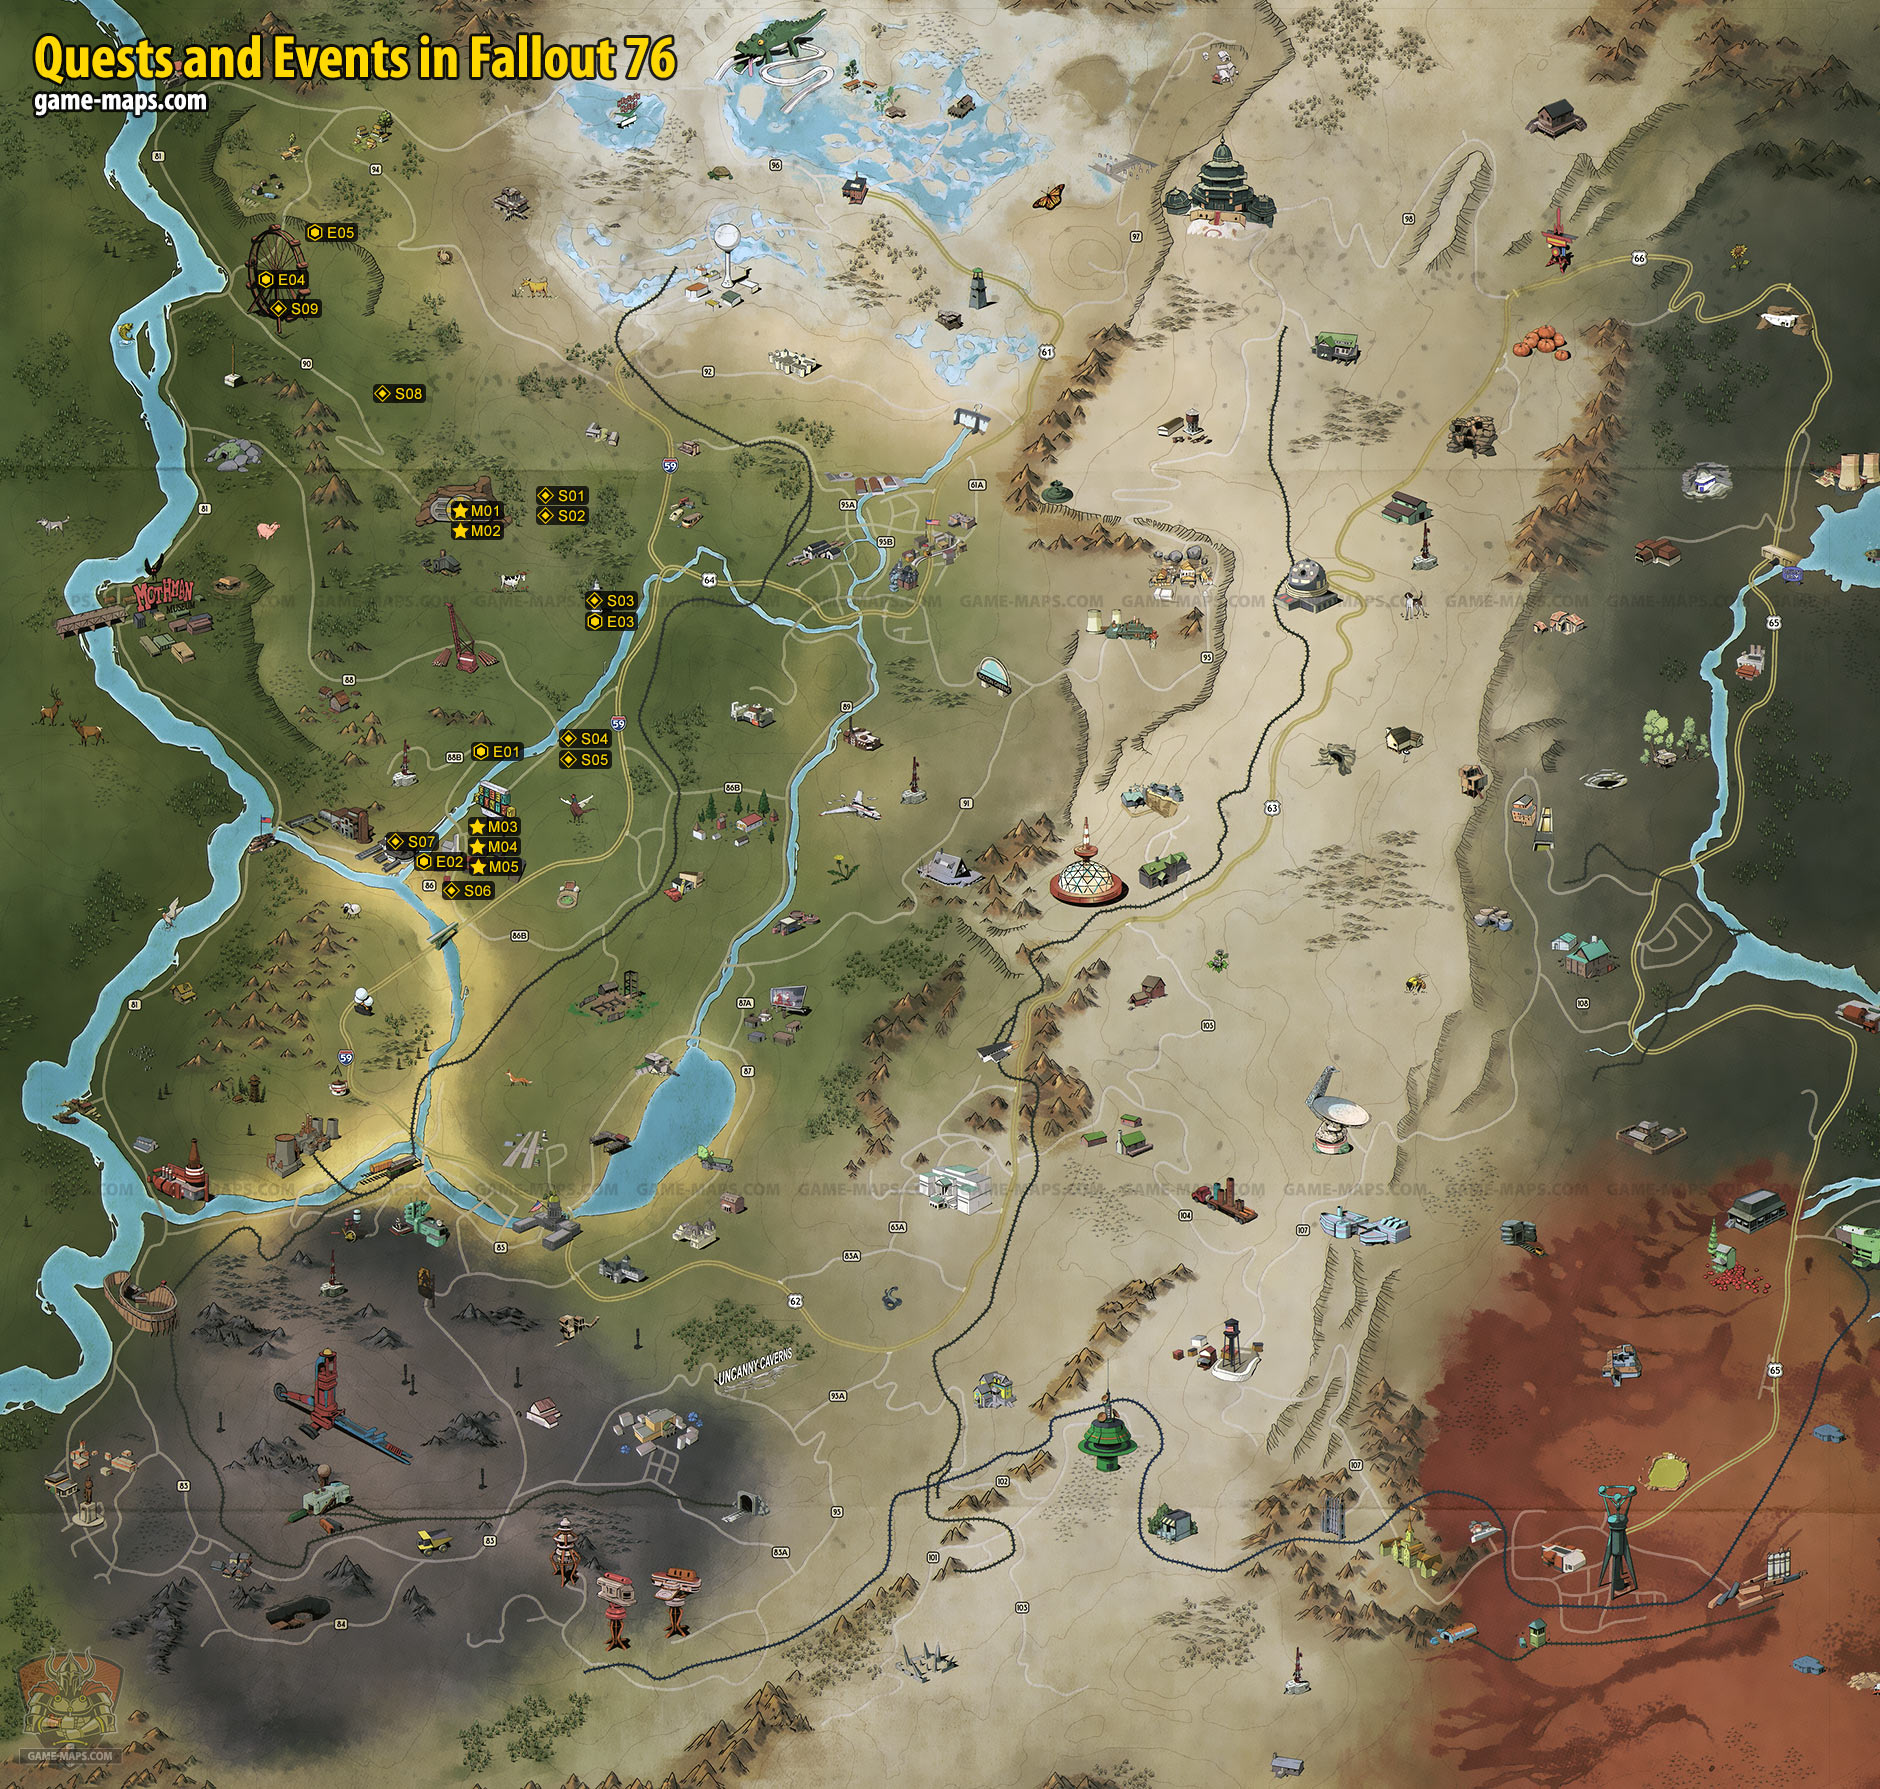 Quests and Events in Fallout 76 game maps com. game-maps.com. 